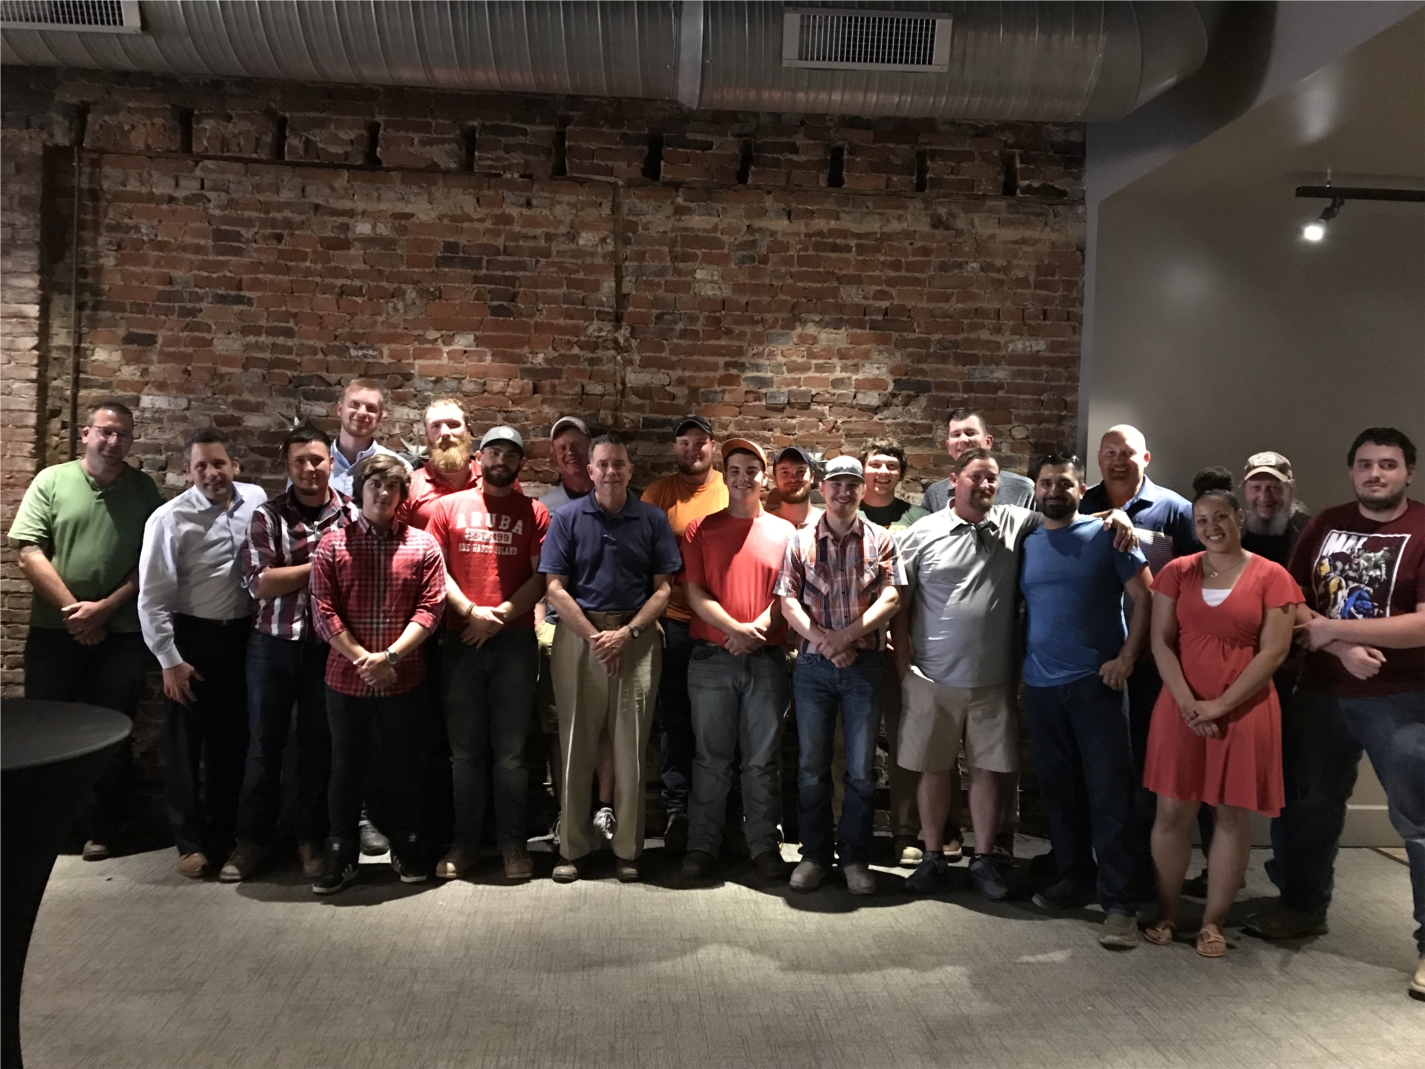 2018 Electrical Apprenticeship Graduates, Instructors, and Company Officers